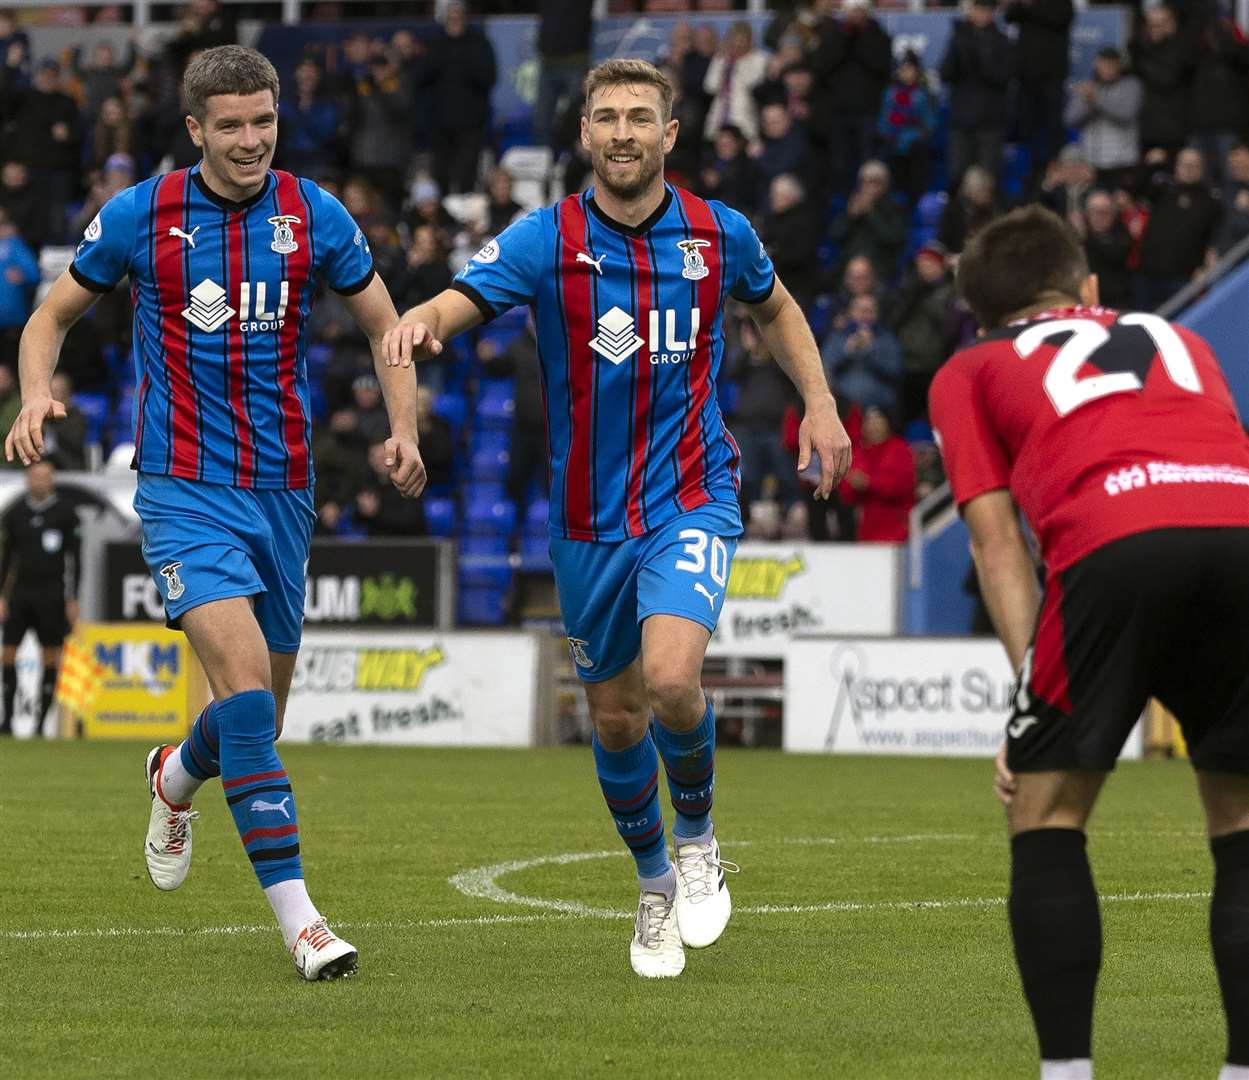 Picture - Ken Macpherson. Inverness CT(1) v Airdrie(0). 28/10/23. ICT’s David Wotherspoon celebrates after scoring the winning goal.